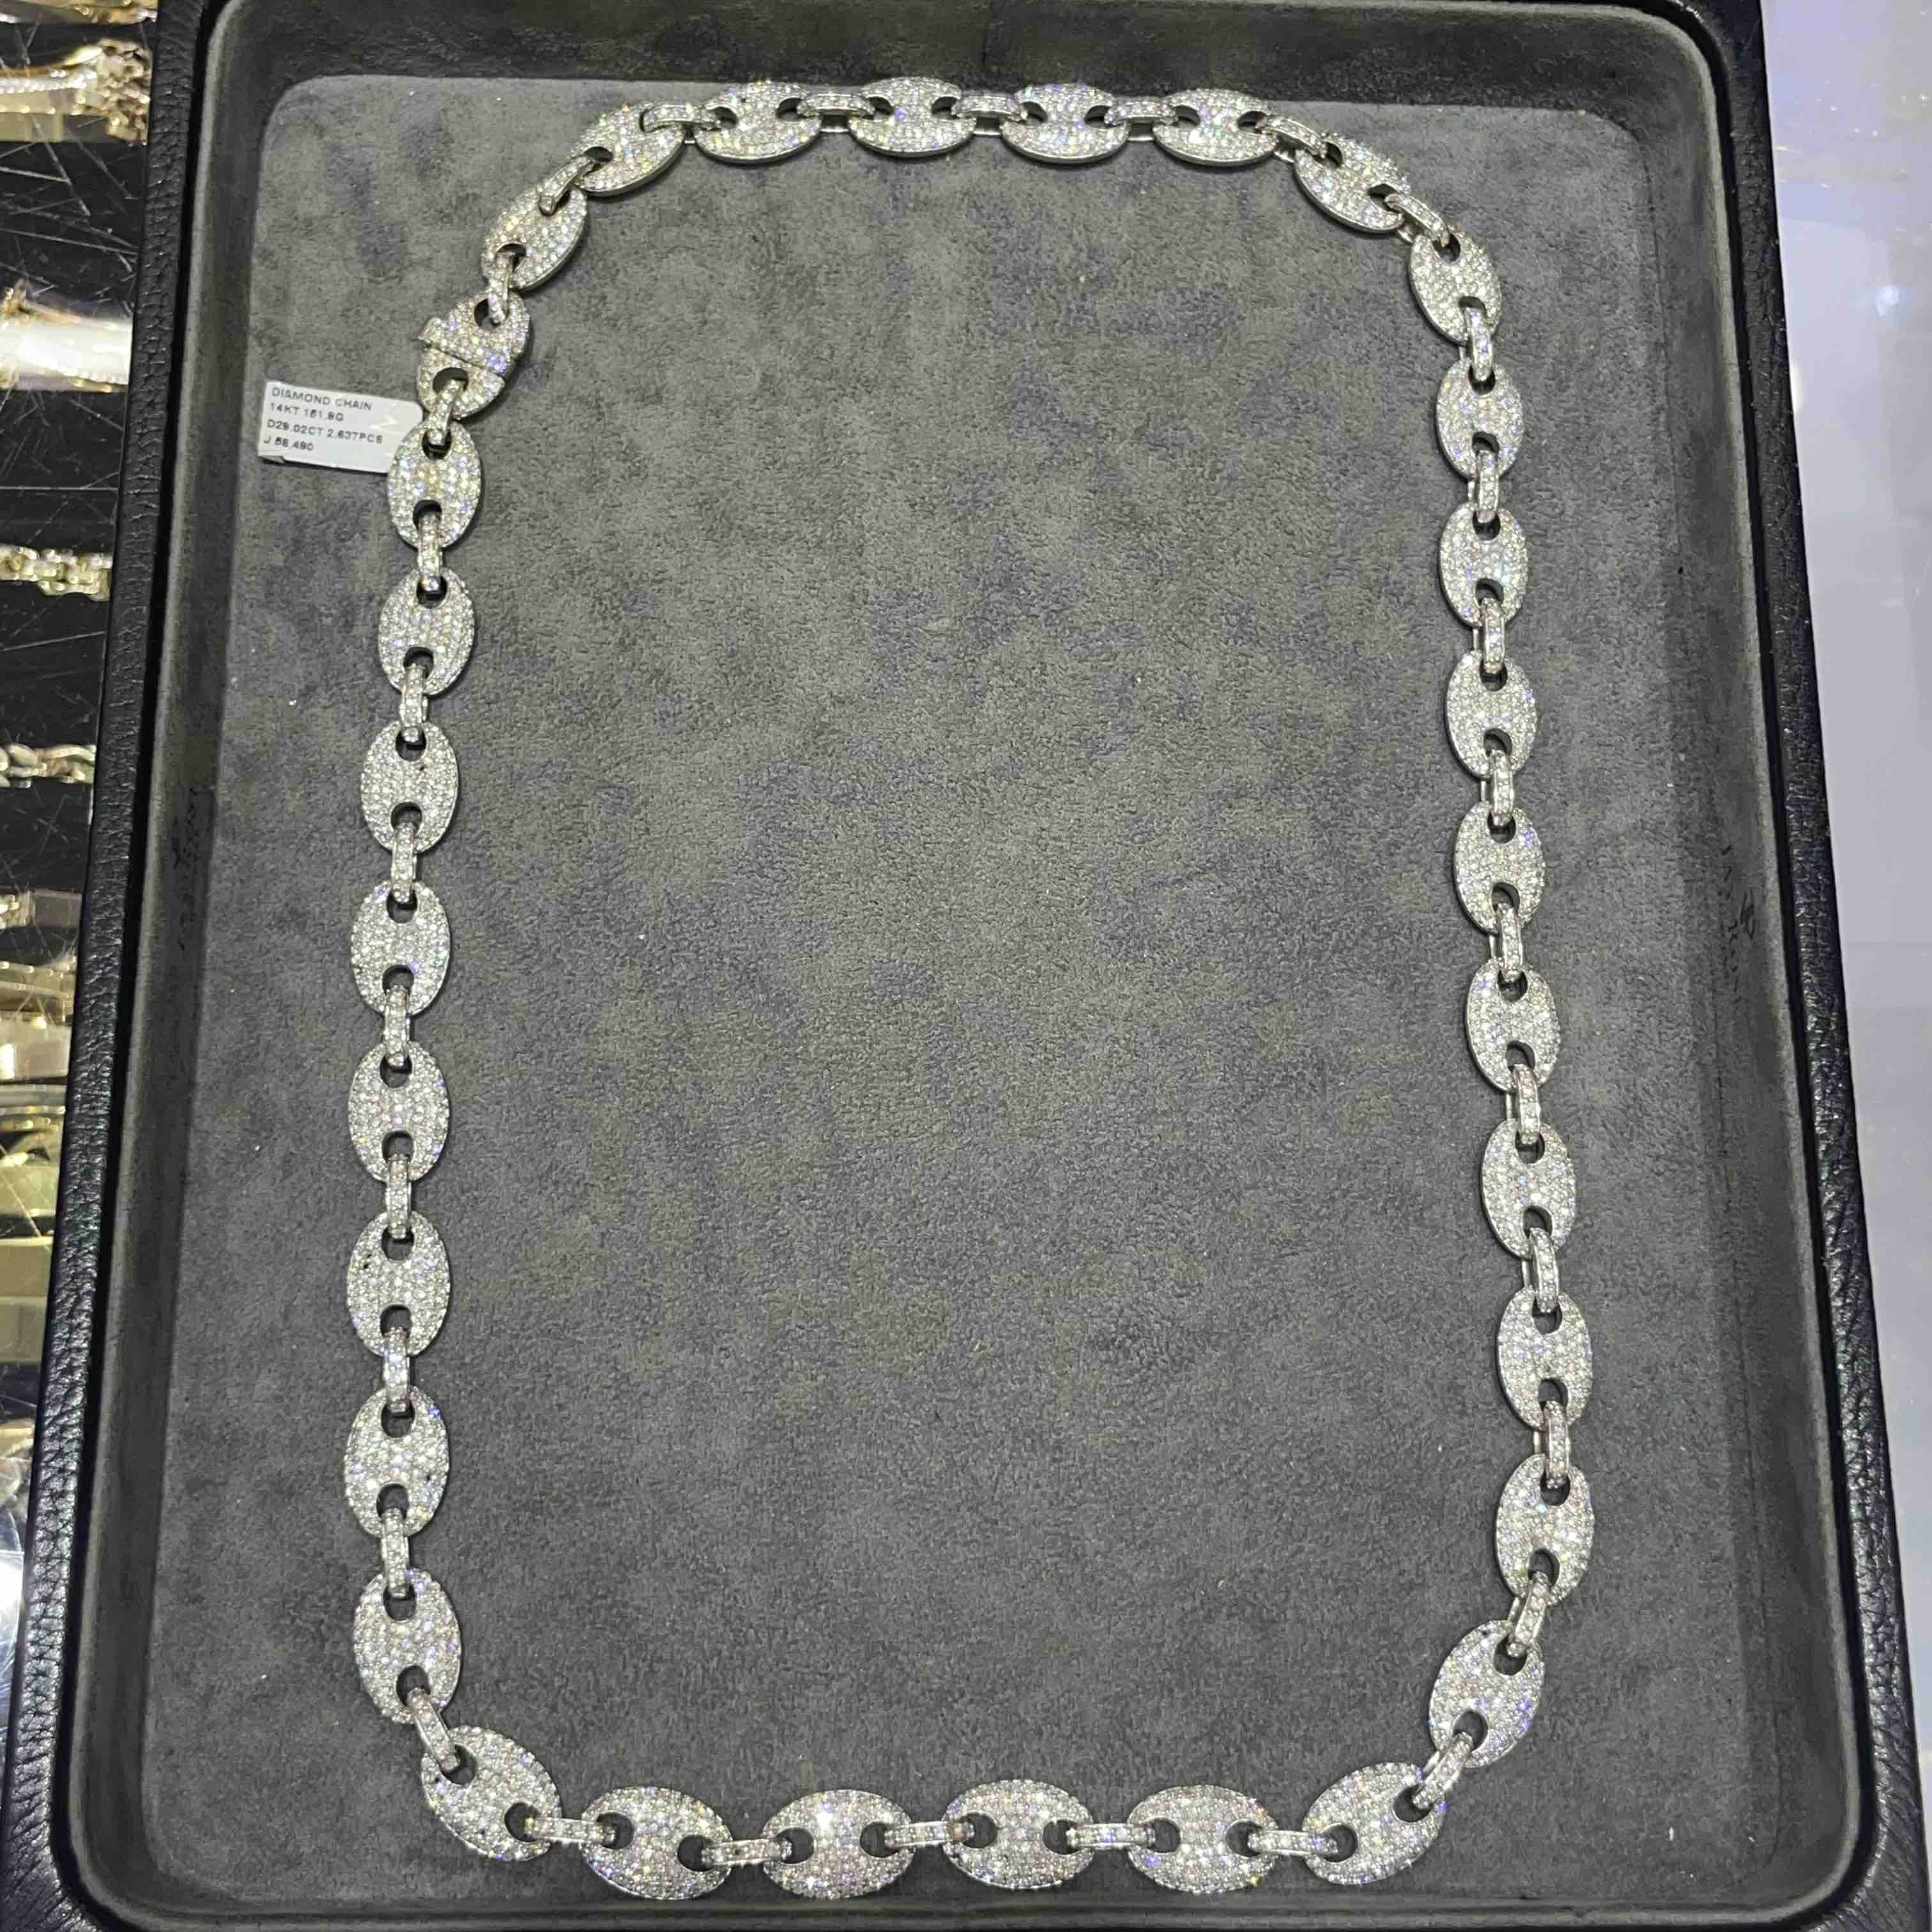 14k White Gold Gucci Link Chain Iced Out | 29 ct VS1